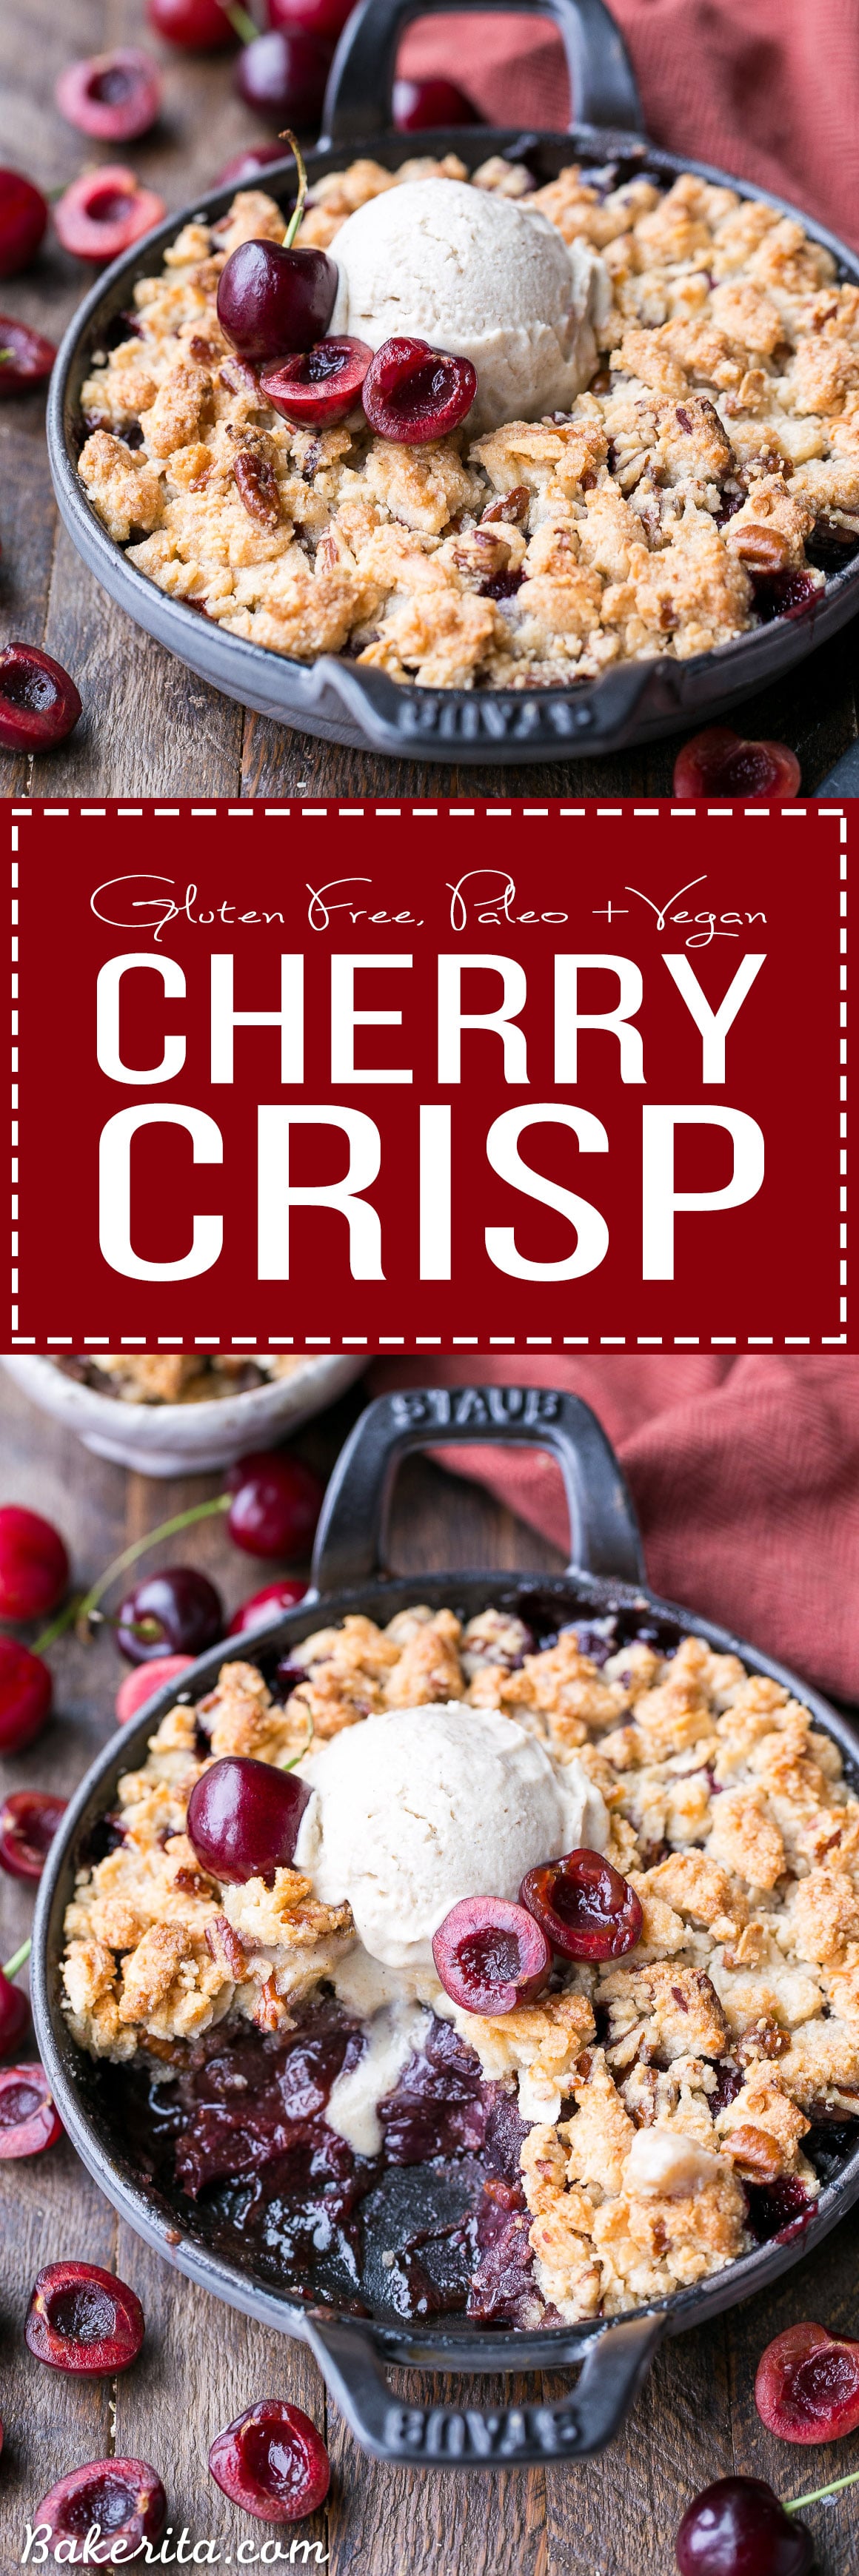 This Cherry Crisp has an irresistible grain-free crumble topping that will have your spoon diving in for more! It's a sweet and flavorful gluten-free, paleo, and vegan dessert that can be enjoyed all year round.